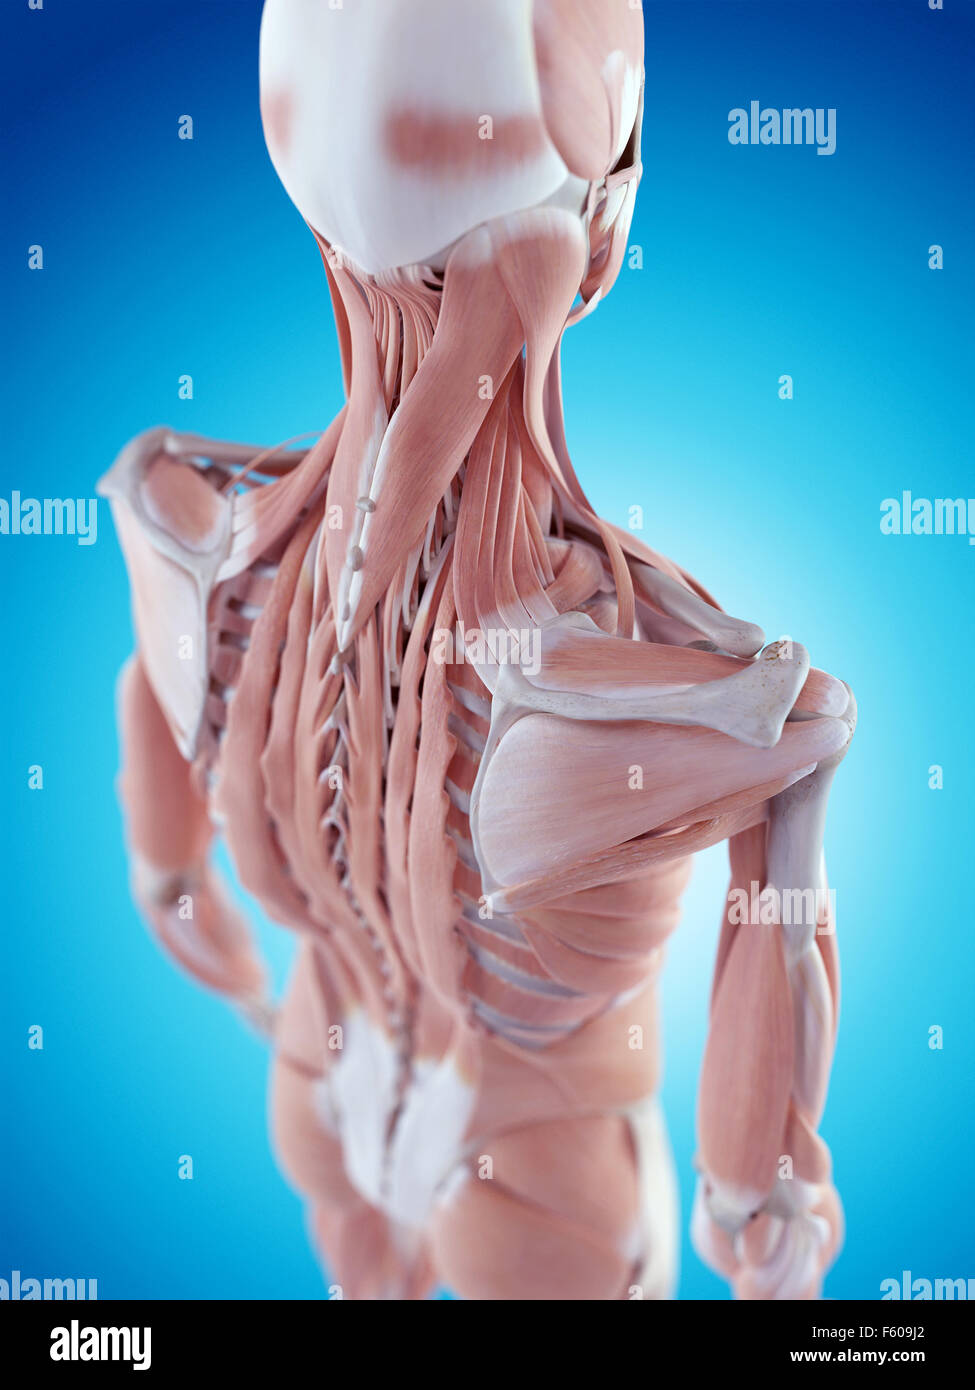 medically accurate illustration of the shoulder anatomy Stock Photo